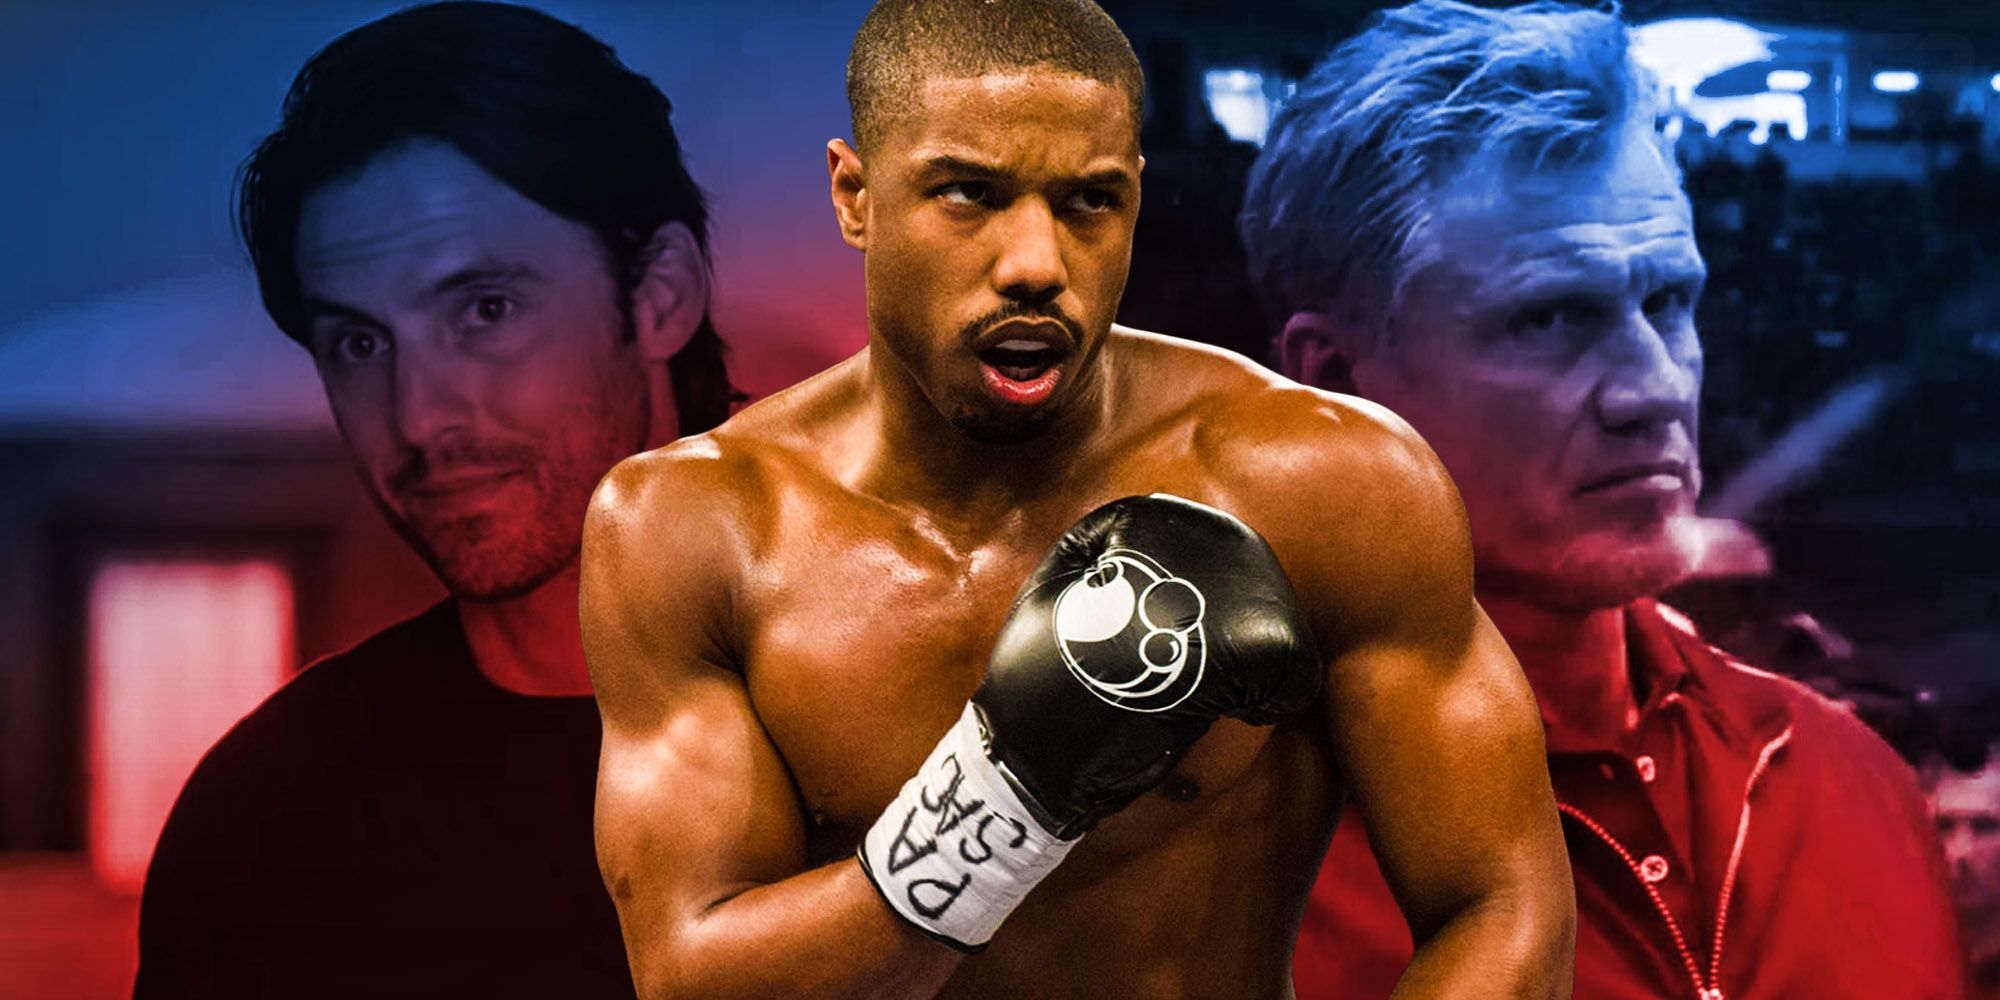 The Creed movies feature several Rocky returnees, from major characters lik...